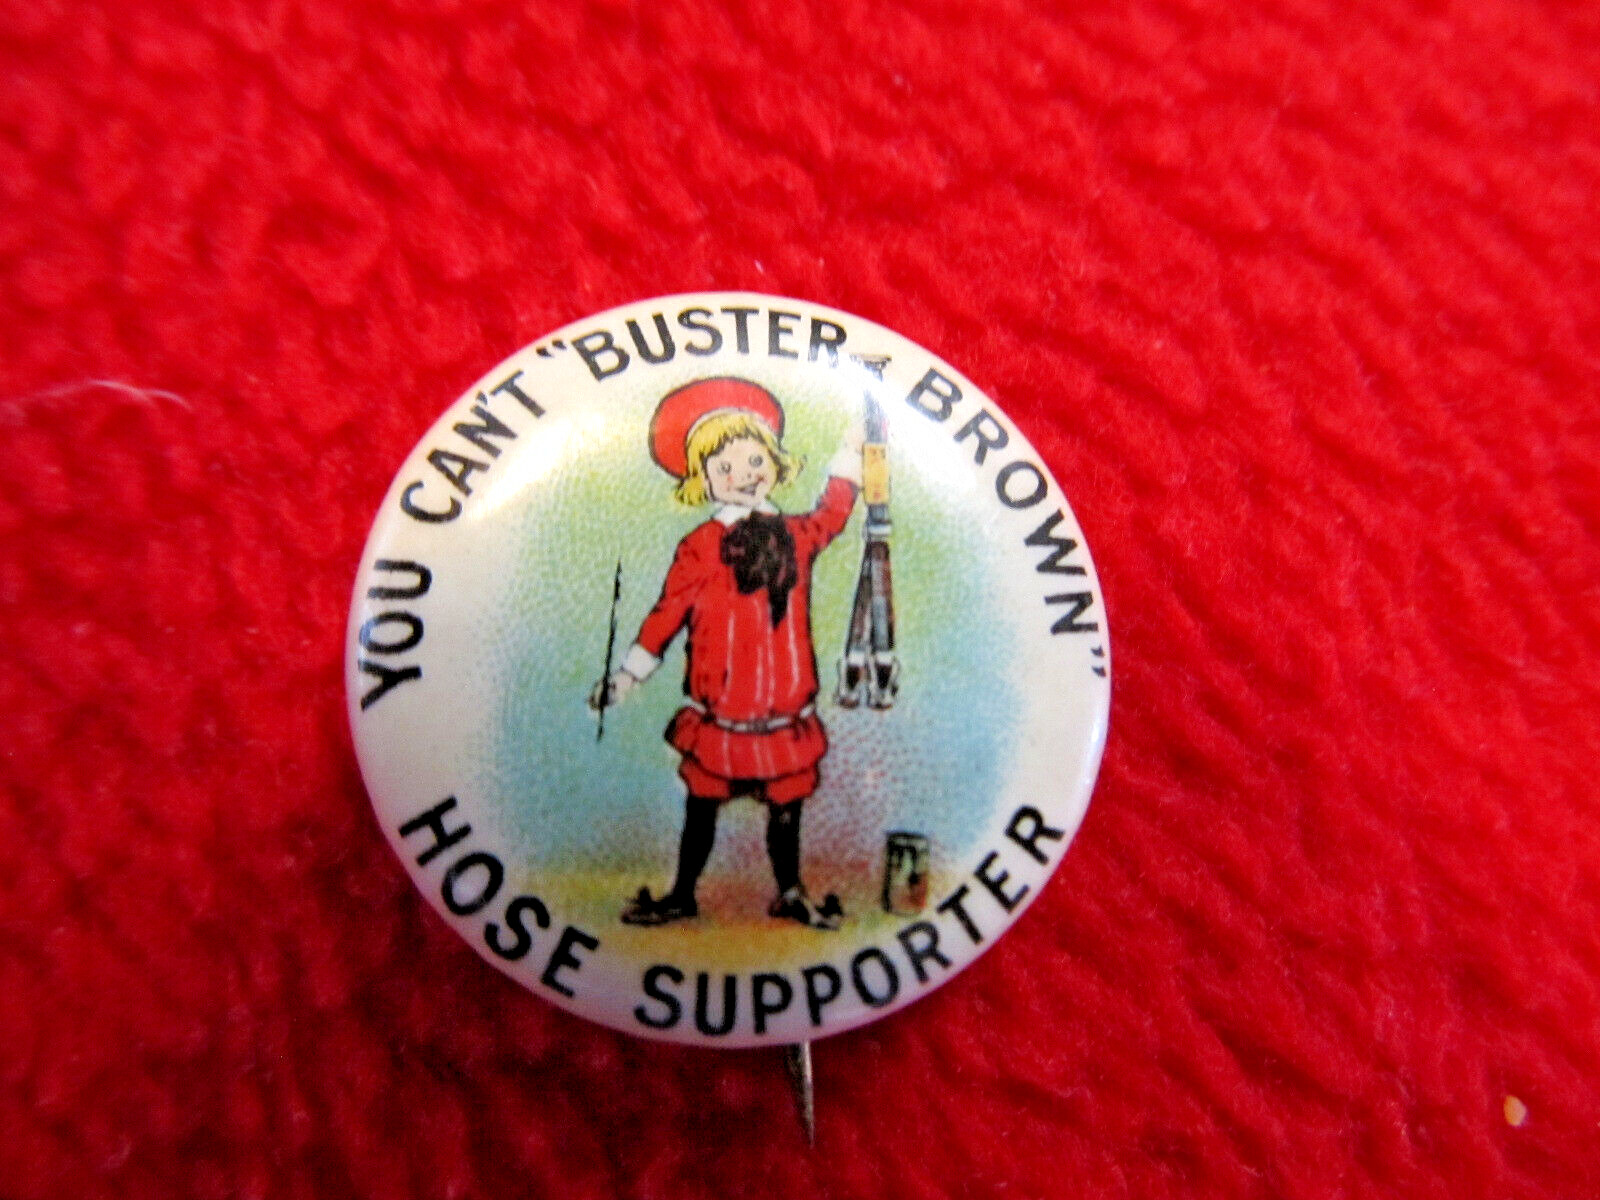 Antique BUSTER BROWN HOSE Supporter Celluloid Pinback Advertising Pin